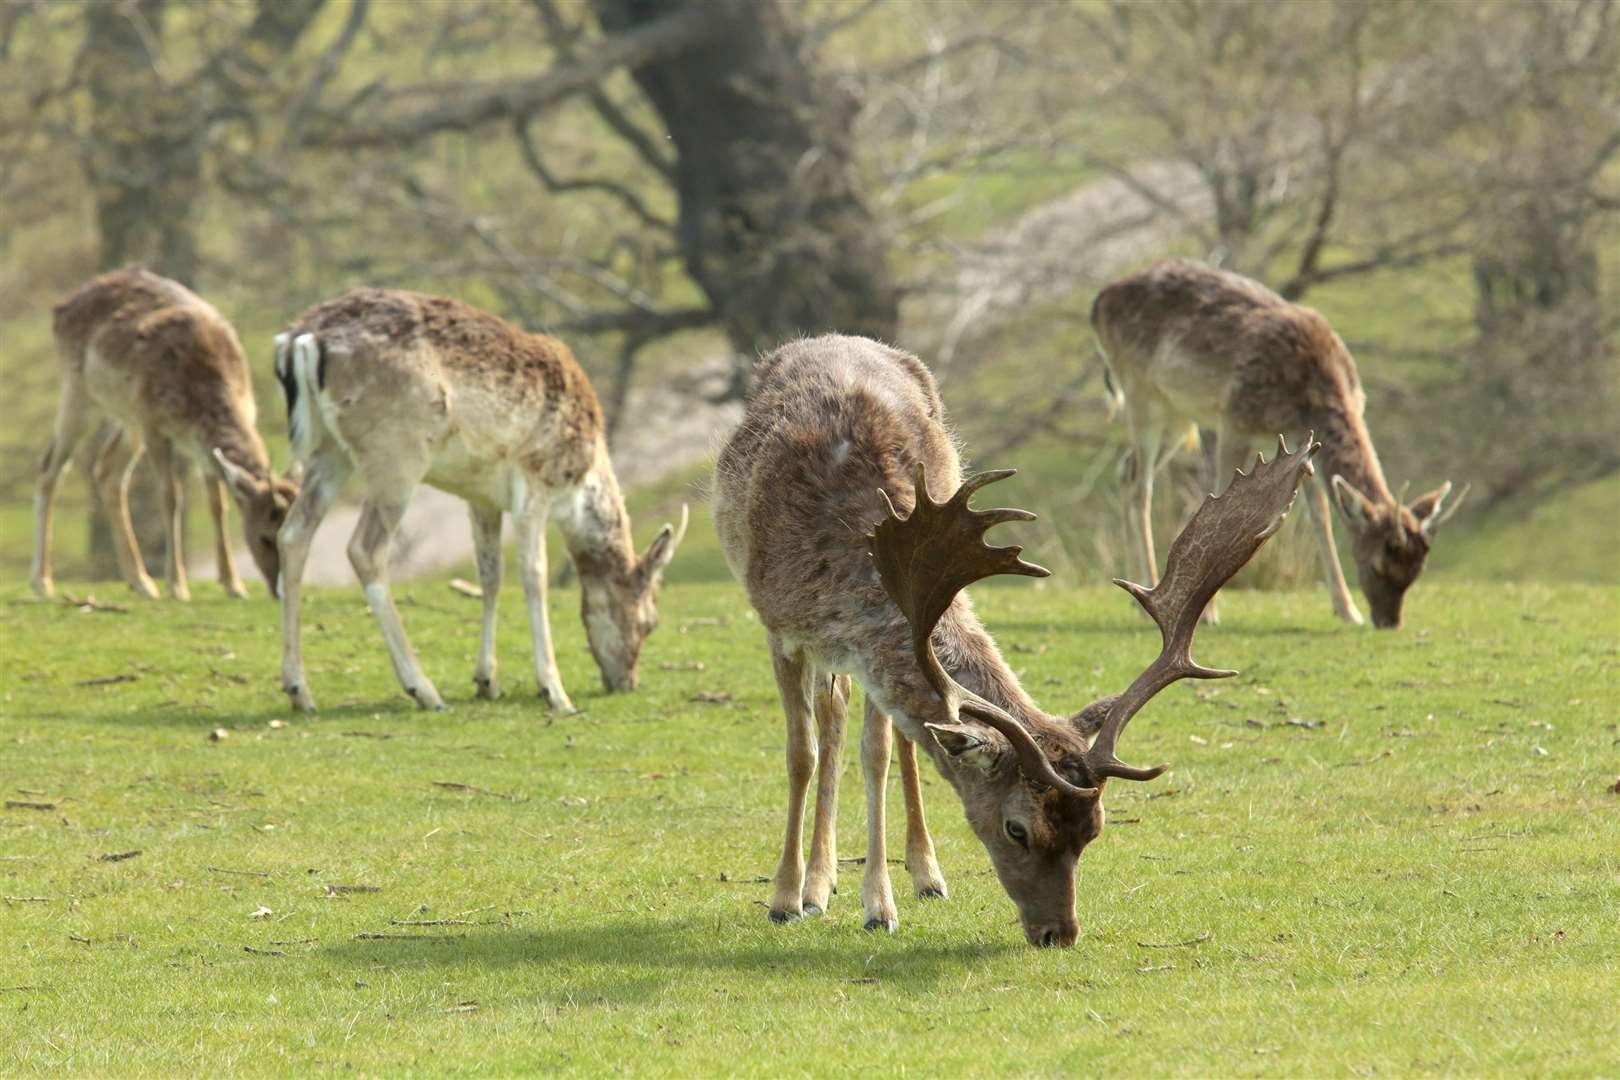 Don't forget to find the deer when visiting Knole